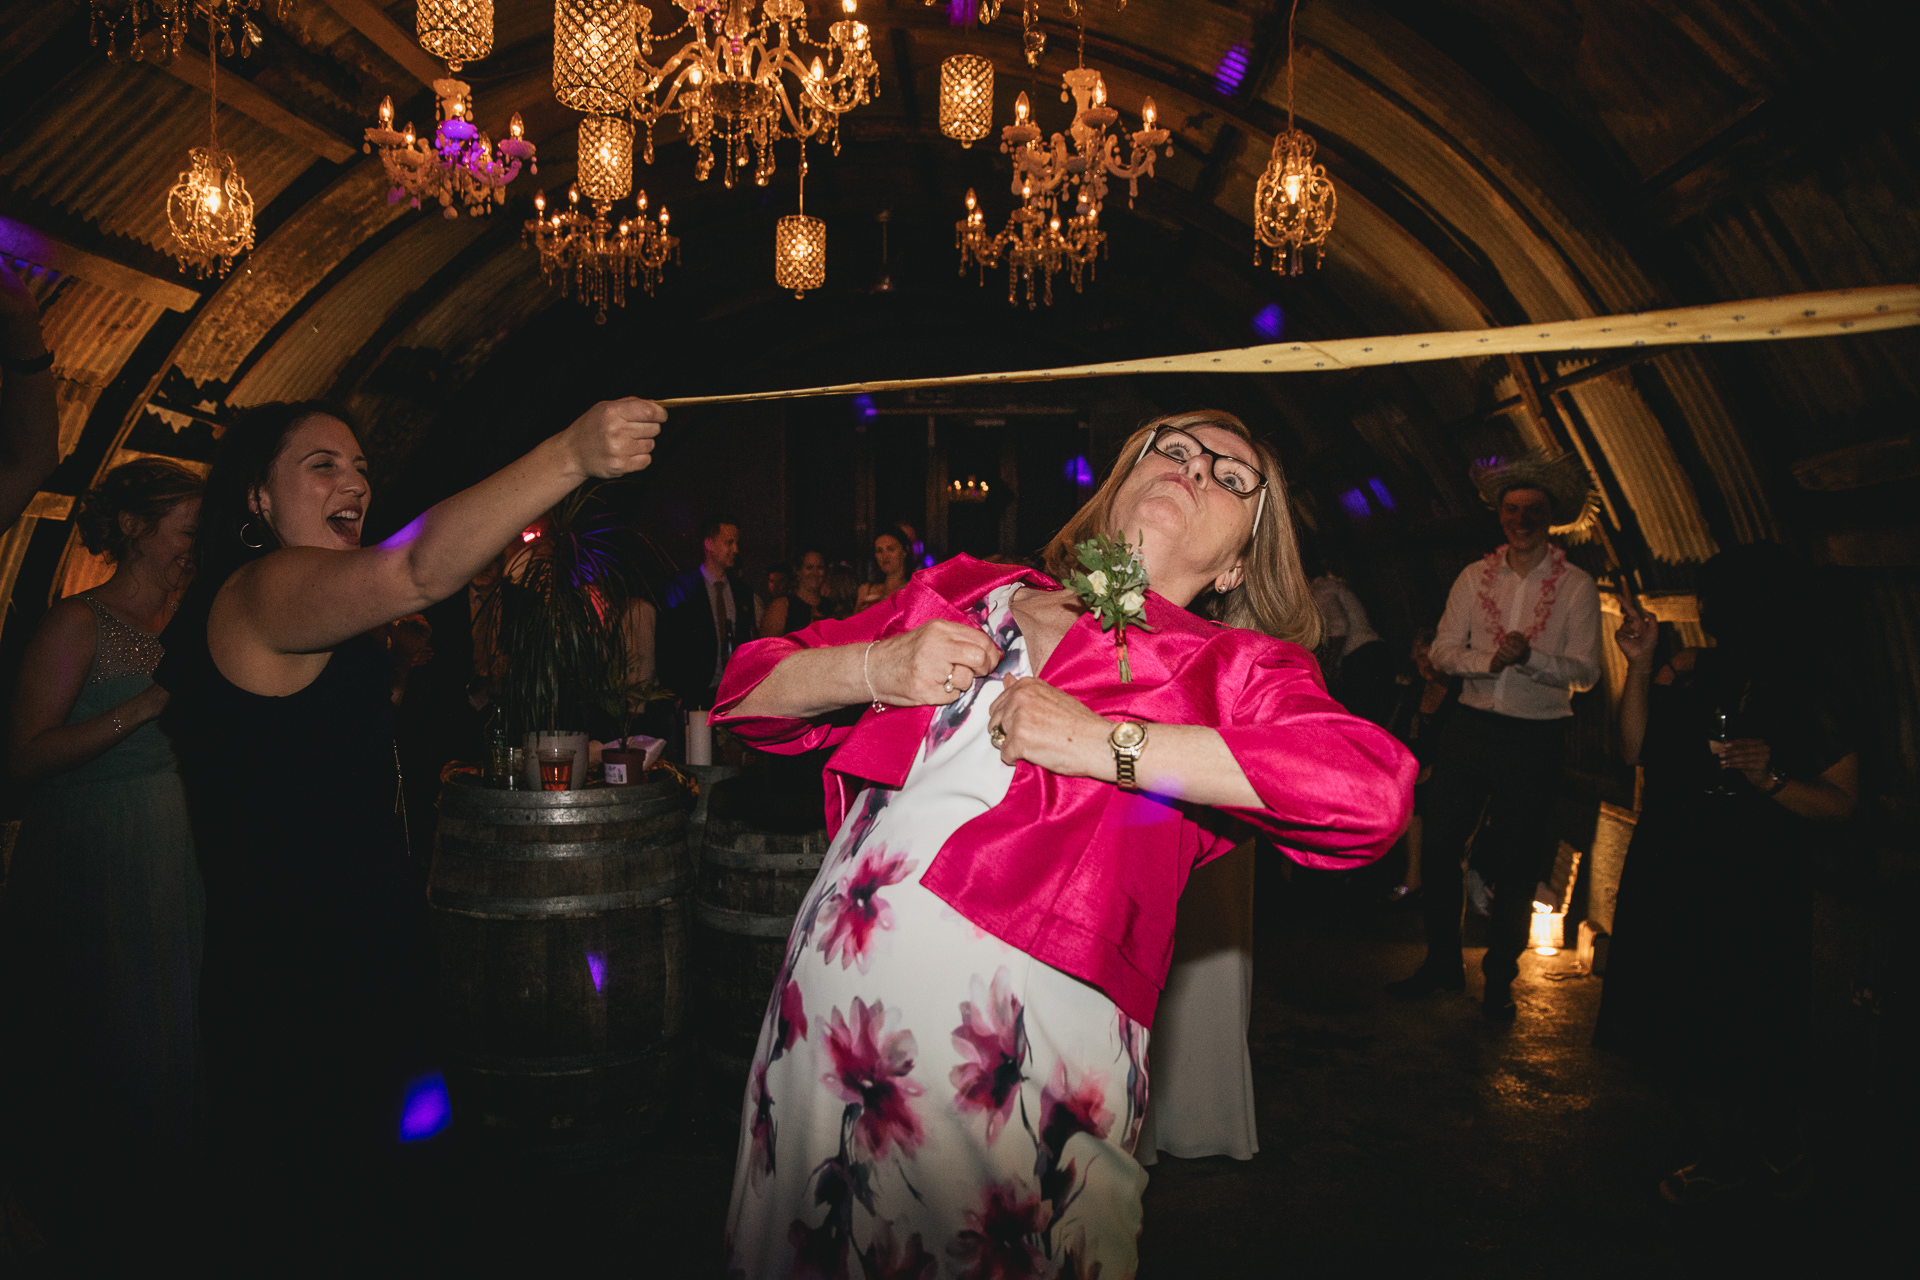 Mother of the bride doing limbo